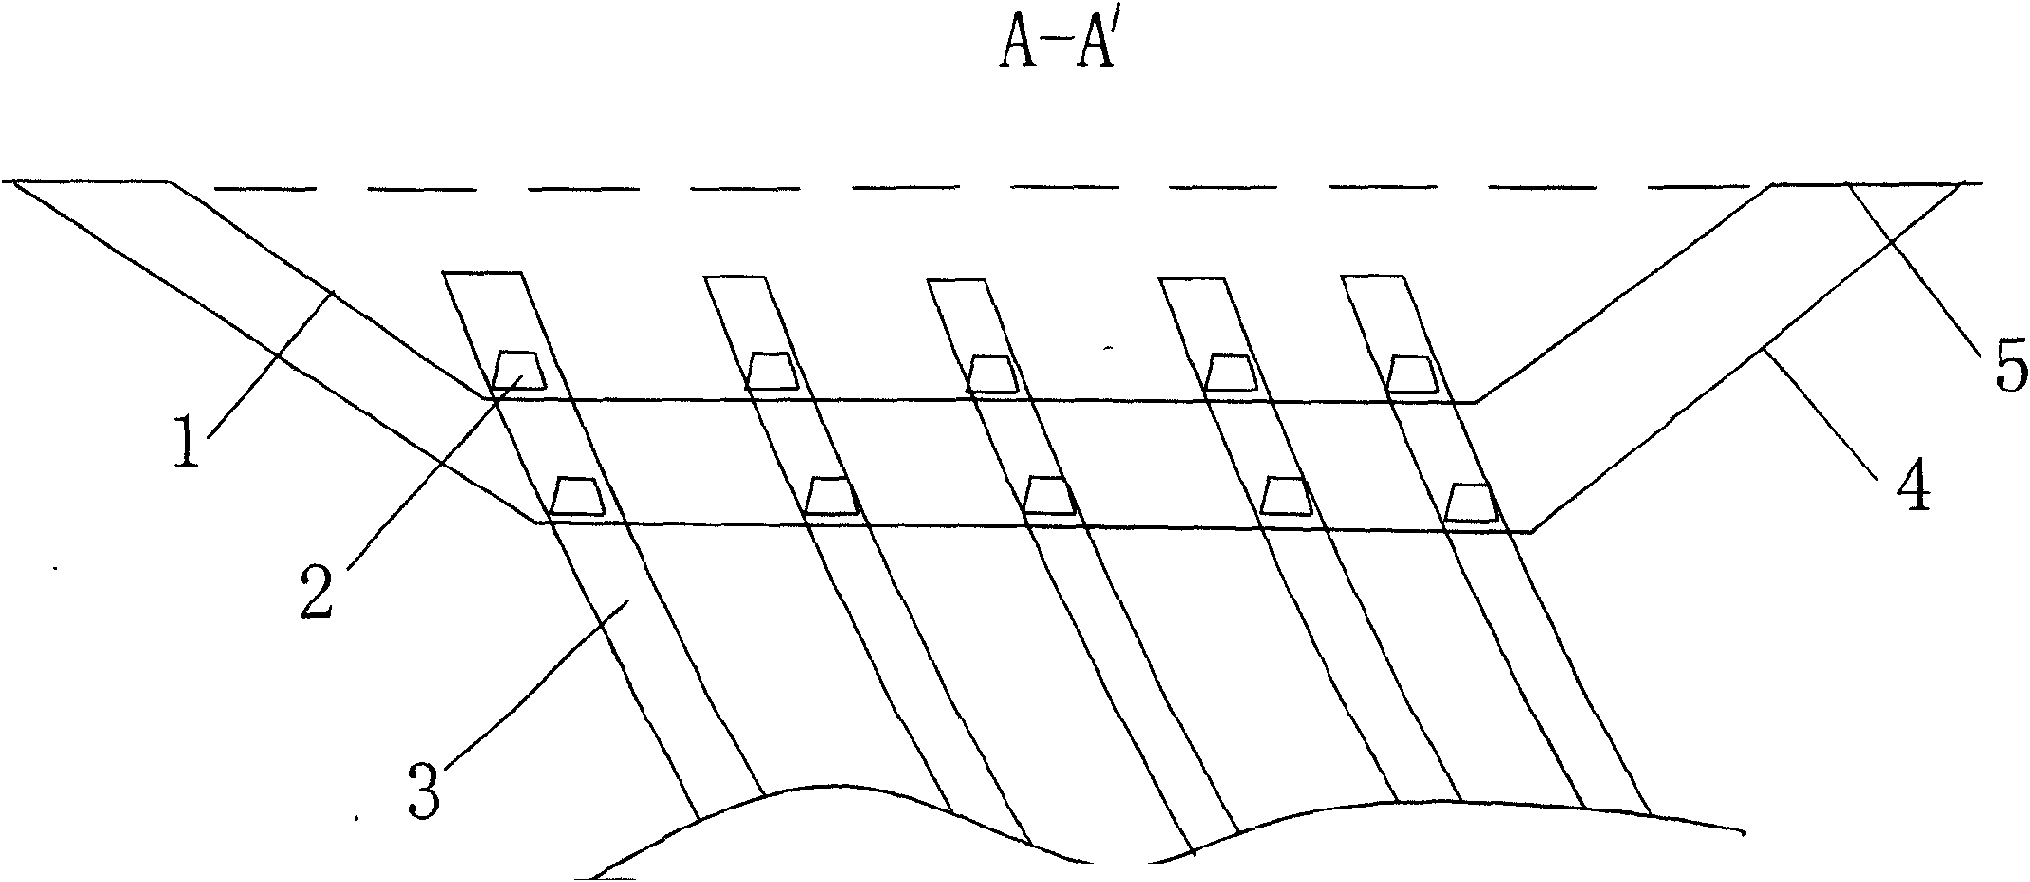 Opencast combined mining method of steeply inclined coal seam groups